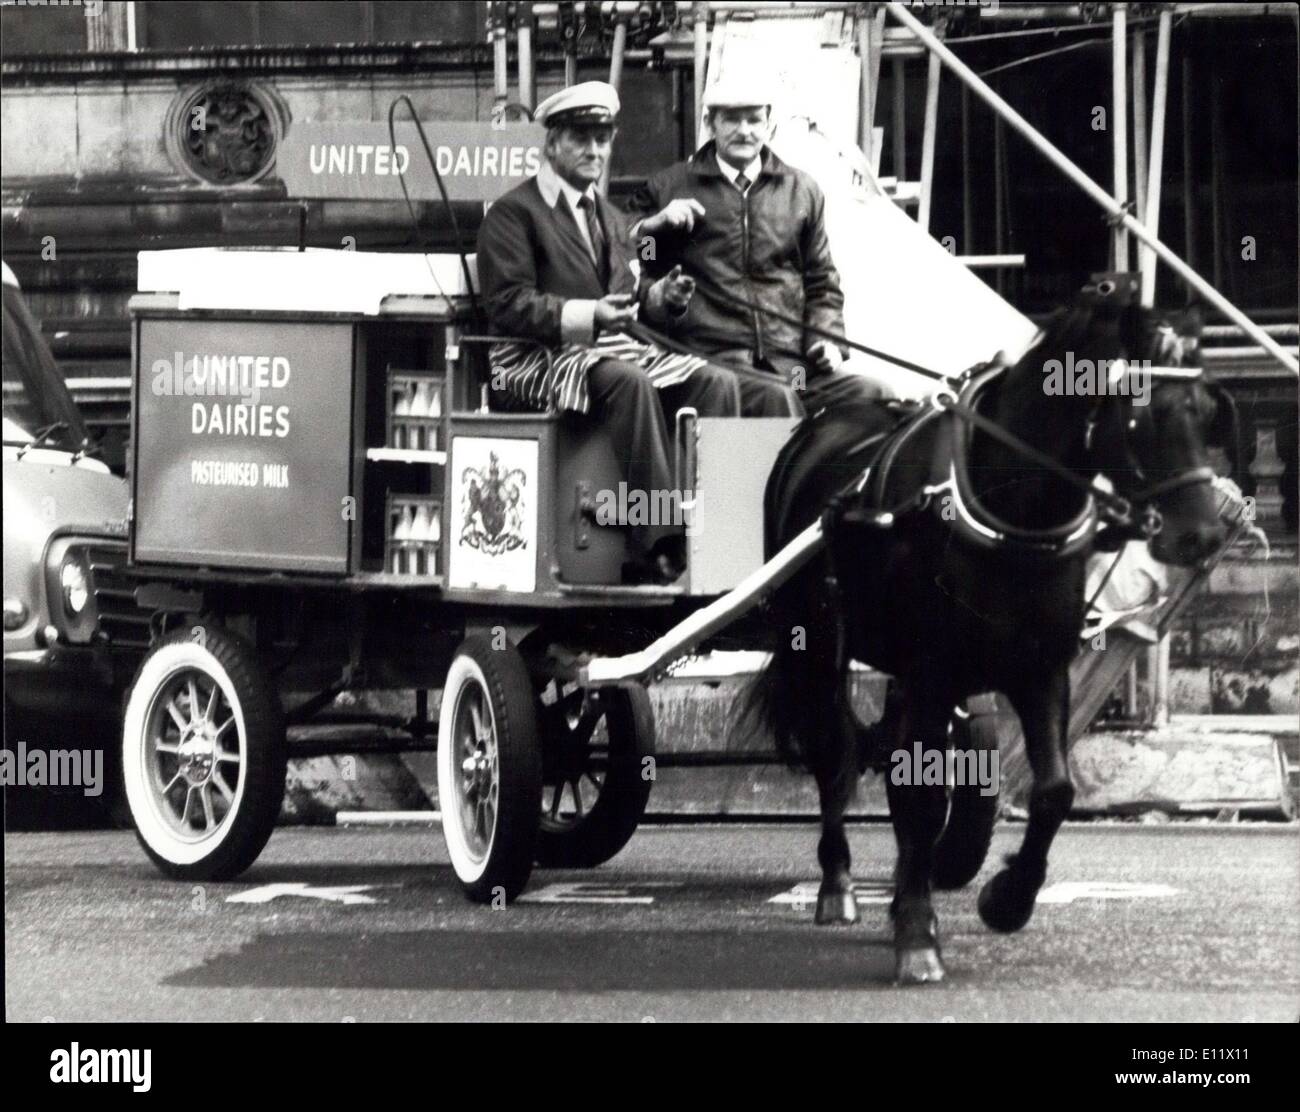 Oct. 07, 1980 - Late Journey for United Dairies Horse-Drawn Float: This purley type float built about 1035 and worked several areas of London before ending its working life about 1957 at the Fulham Deport of the United Dairies, although it continued to be used as a show vehicle until the mid 1960s. We purchased at an auction by the Science Museum in 1979 and has been restored by the Electric Vehicle maintenance department of the UD at Harlenden. Today it made its last journey as it was handed back to the Science Museum to go on display Stock Photo